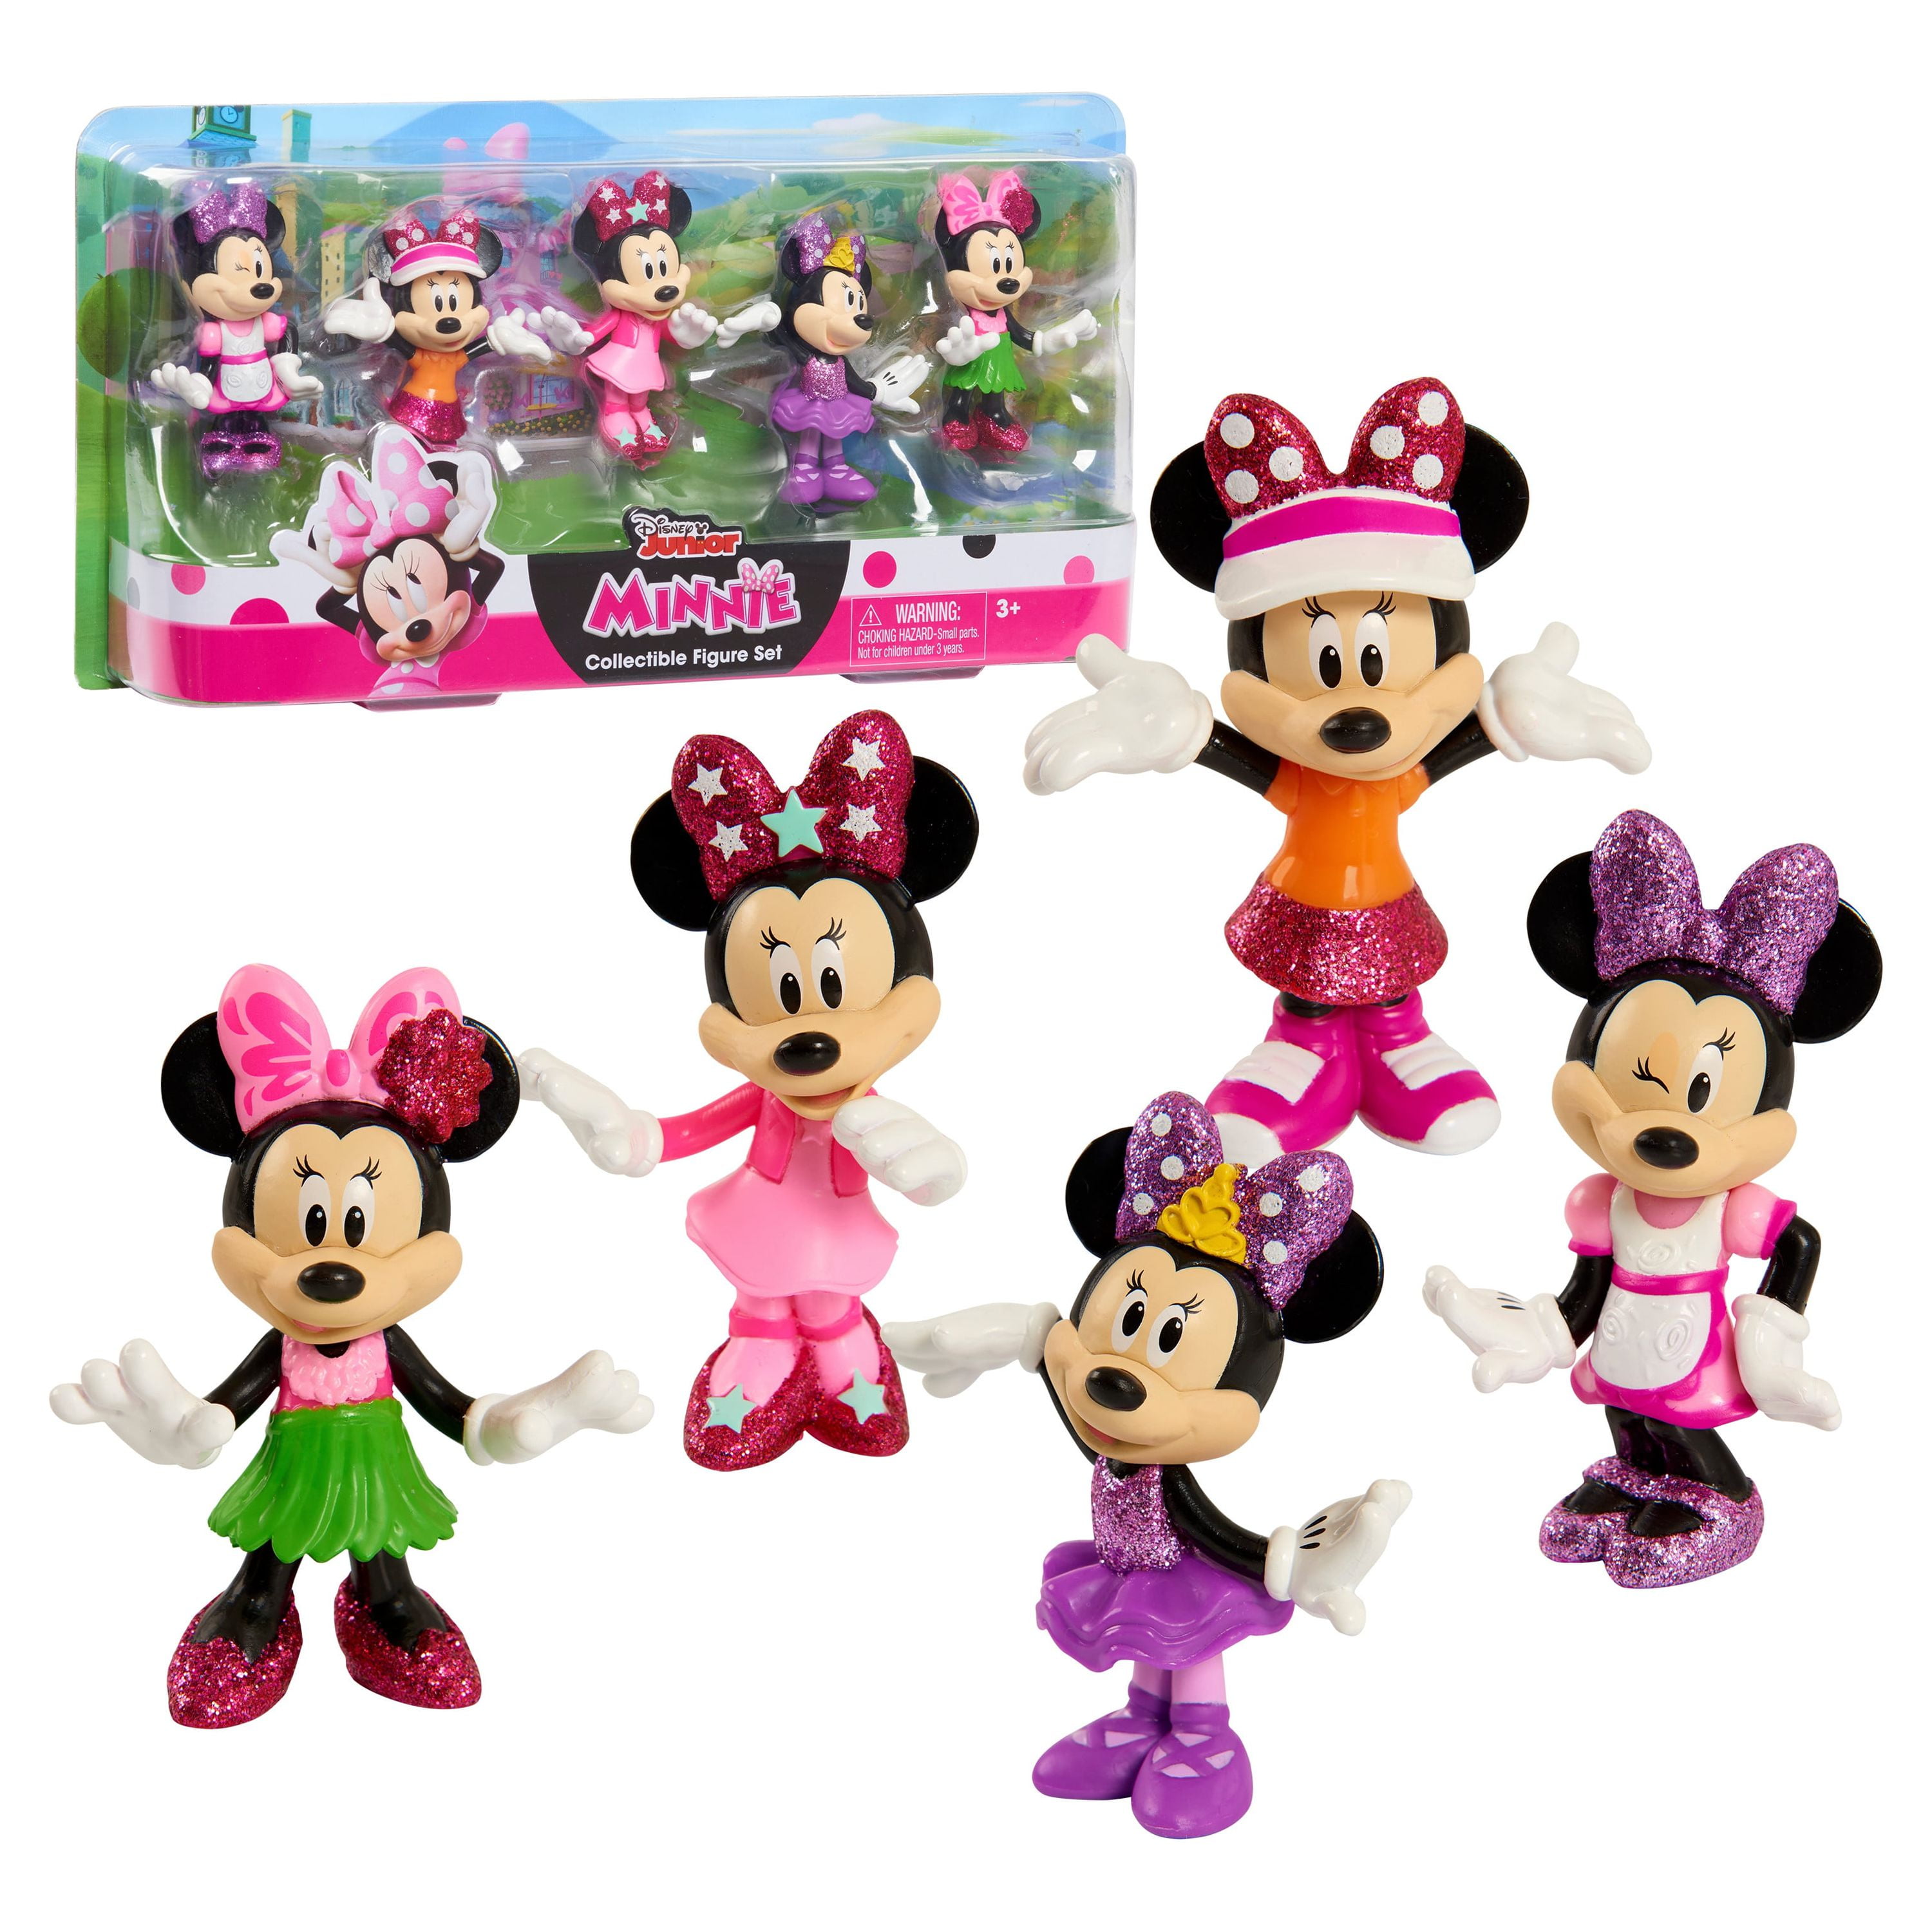  Disney Autograph Book Minnie with 6-IN-1 Multicolor